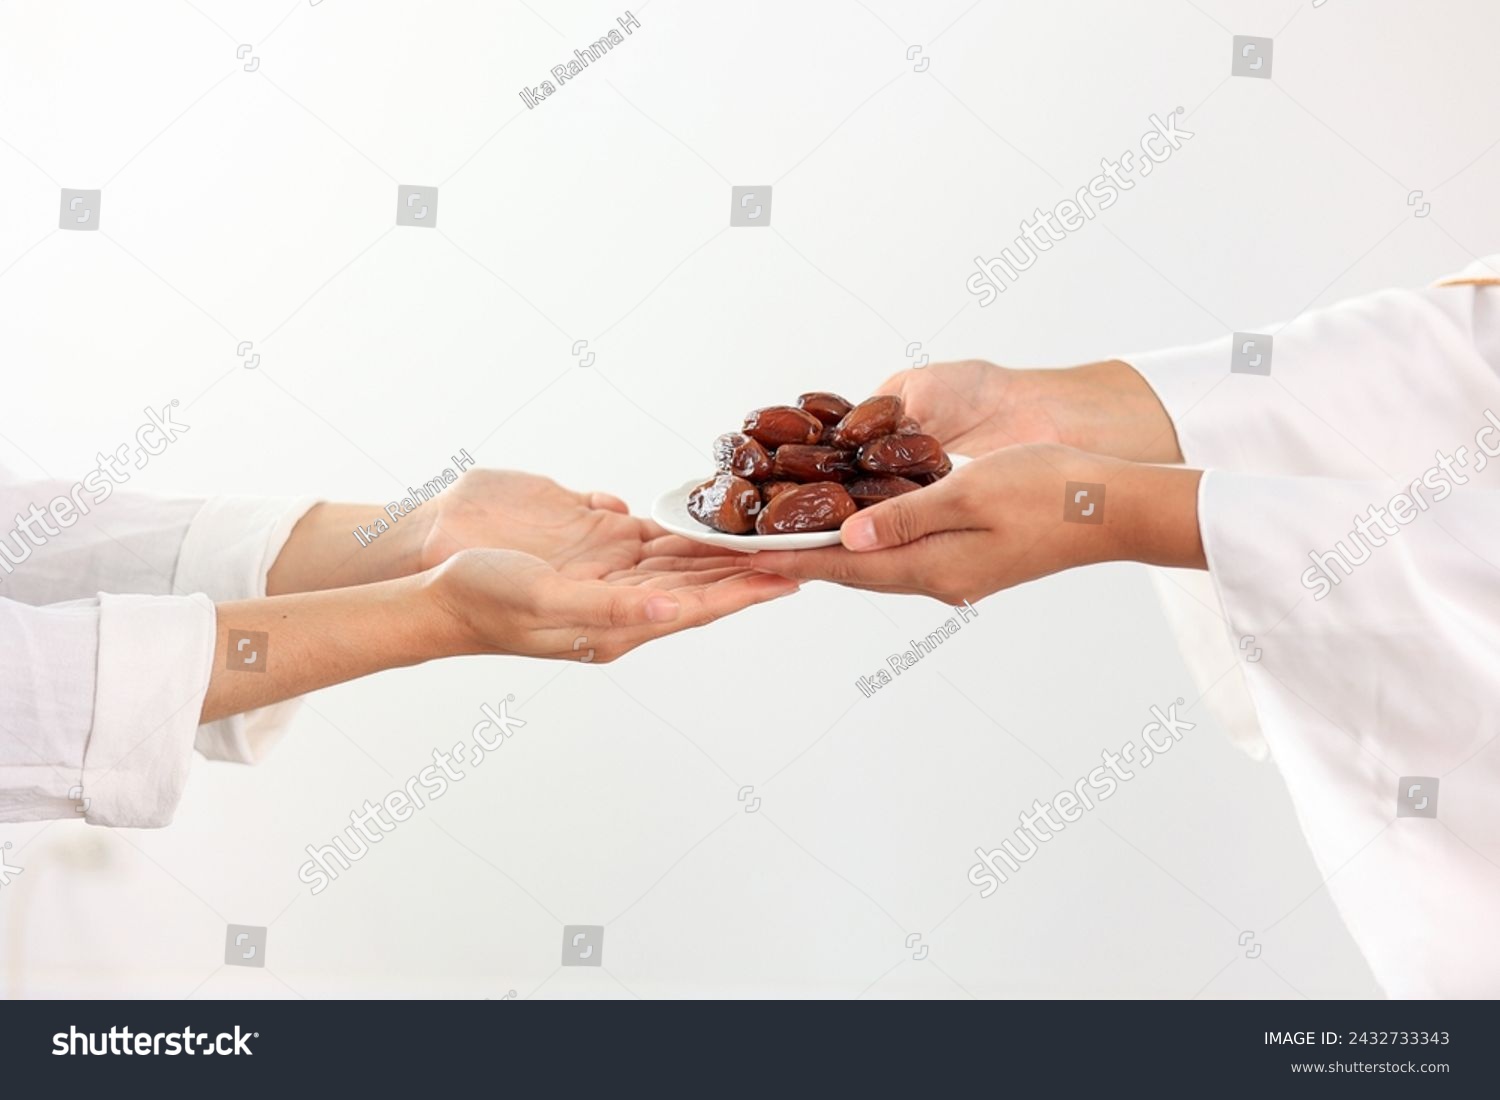 Concept Giving or Charity during Ramadhan Holy Month, Female Muslim Hand Over A Plate of Dates Fruit Kurma to Other. Ifthar and Ramadan Kareem Concept.  #2432733343